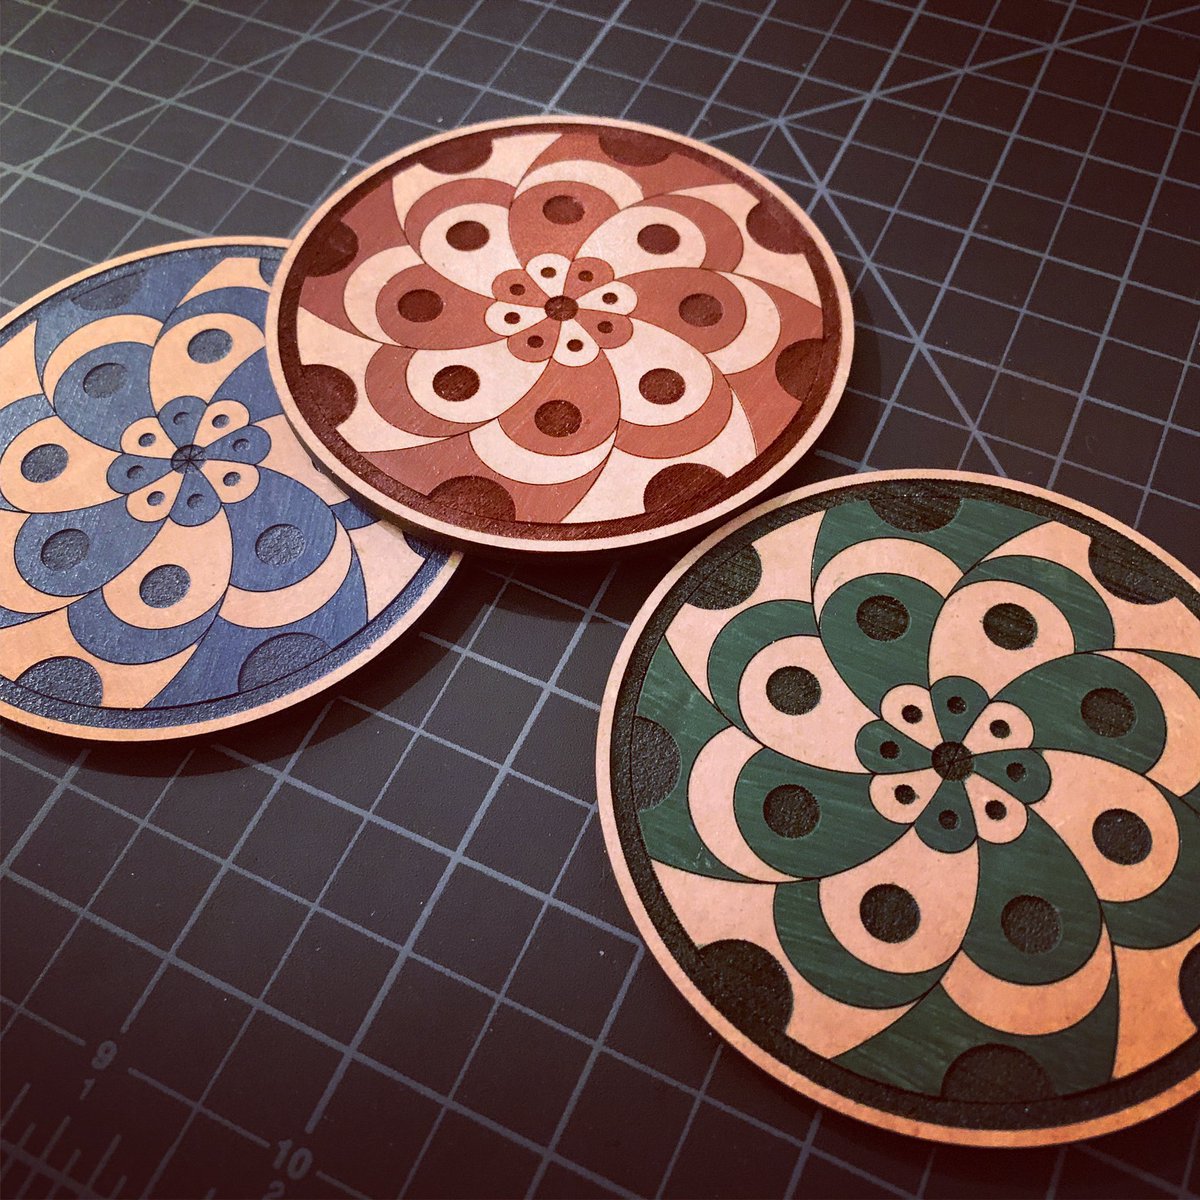 Coasters for phase 1, all three colors will be available once launched. Also! Working on a secondary design. 

#lasercutart #lasercutting #lasercut #geometricdesign #crafts #etsy